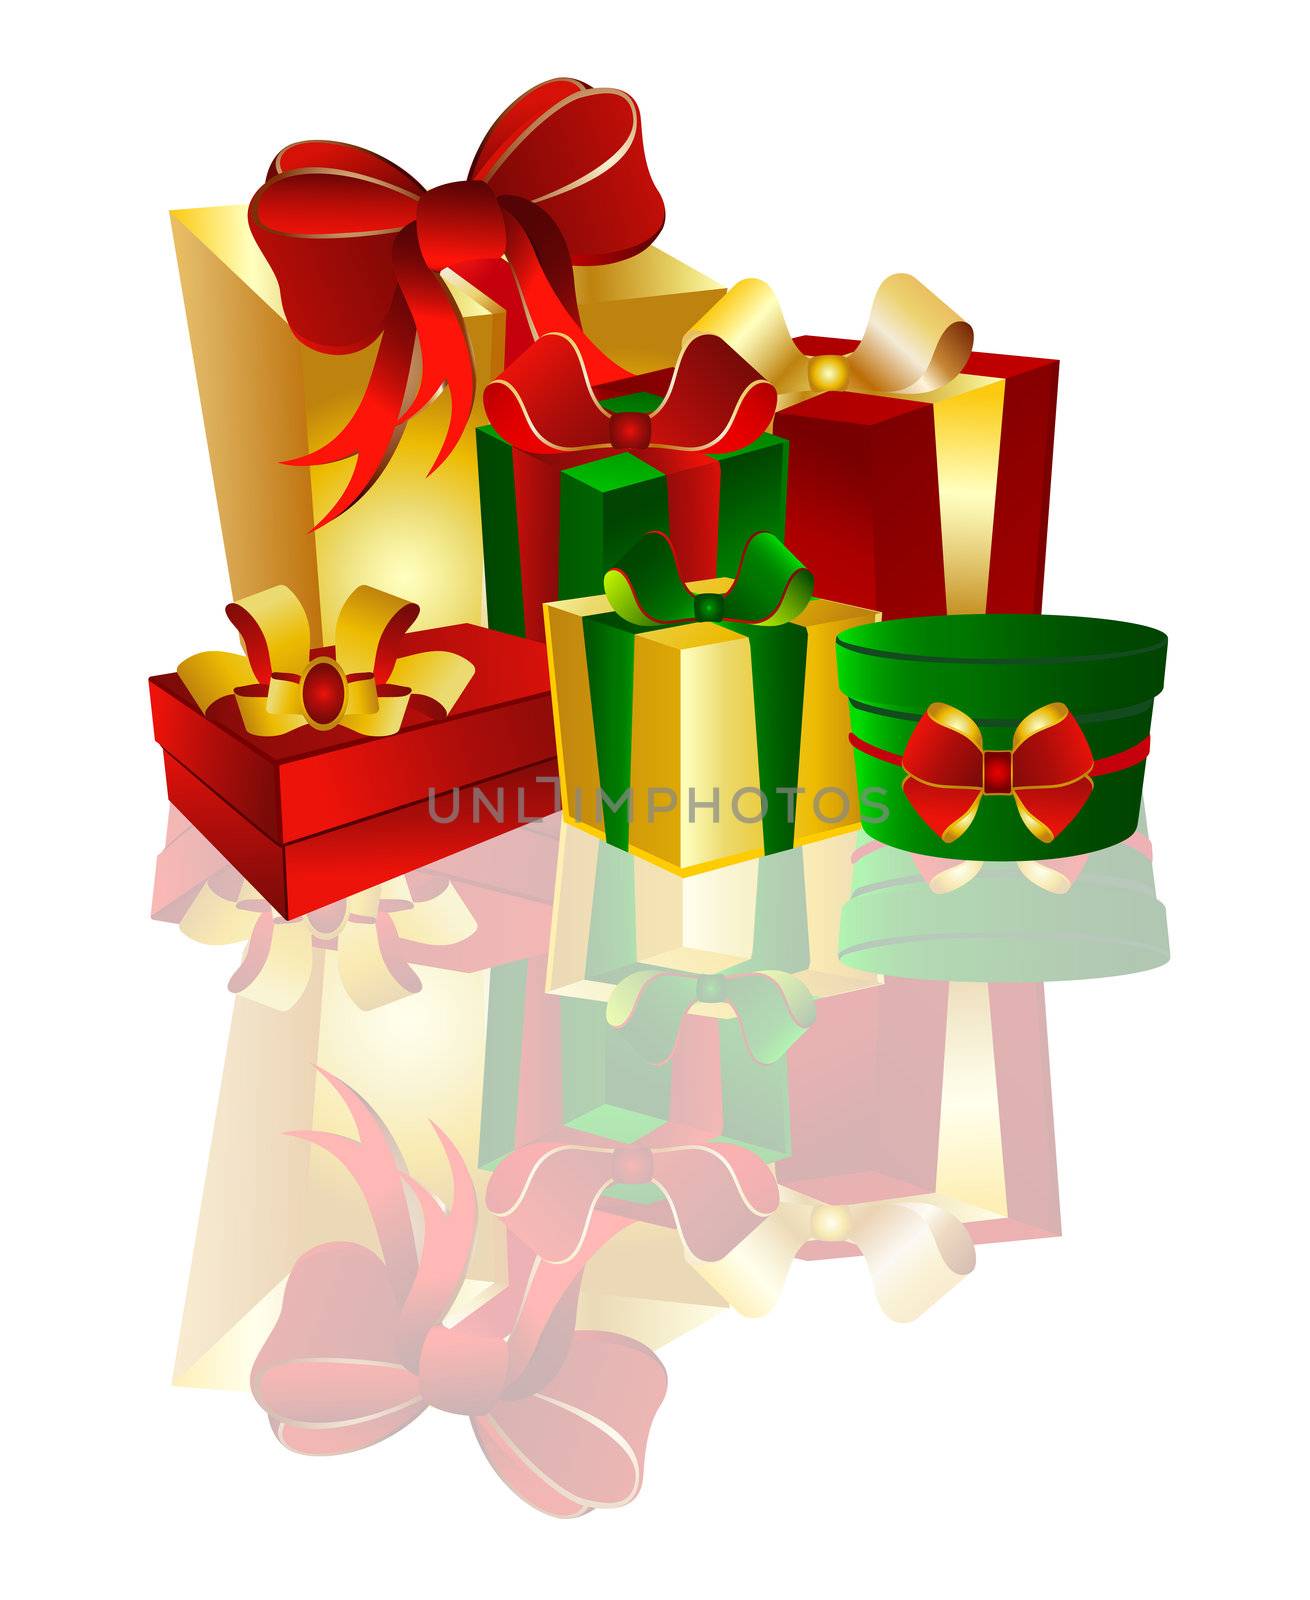 Colorful Gift Boxes on white Background